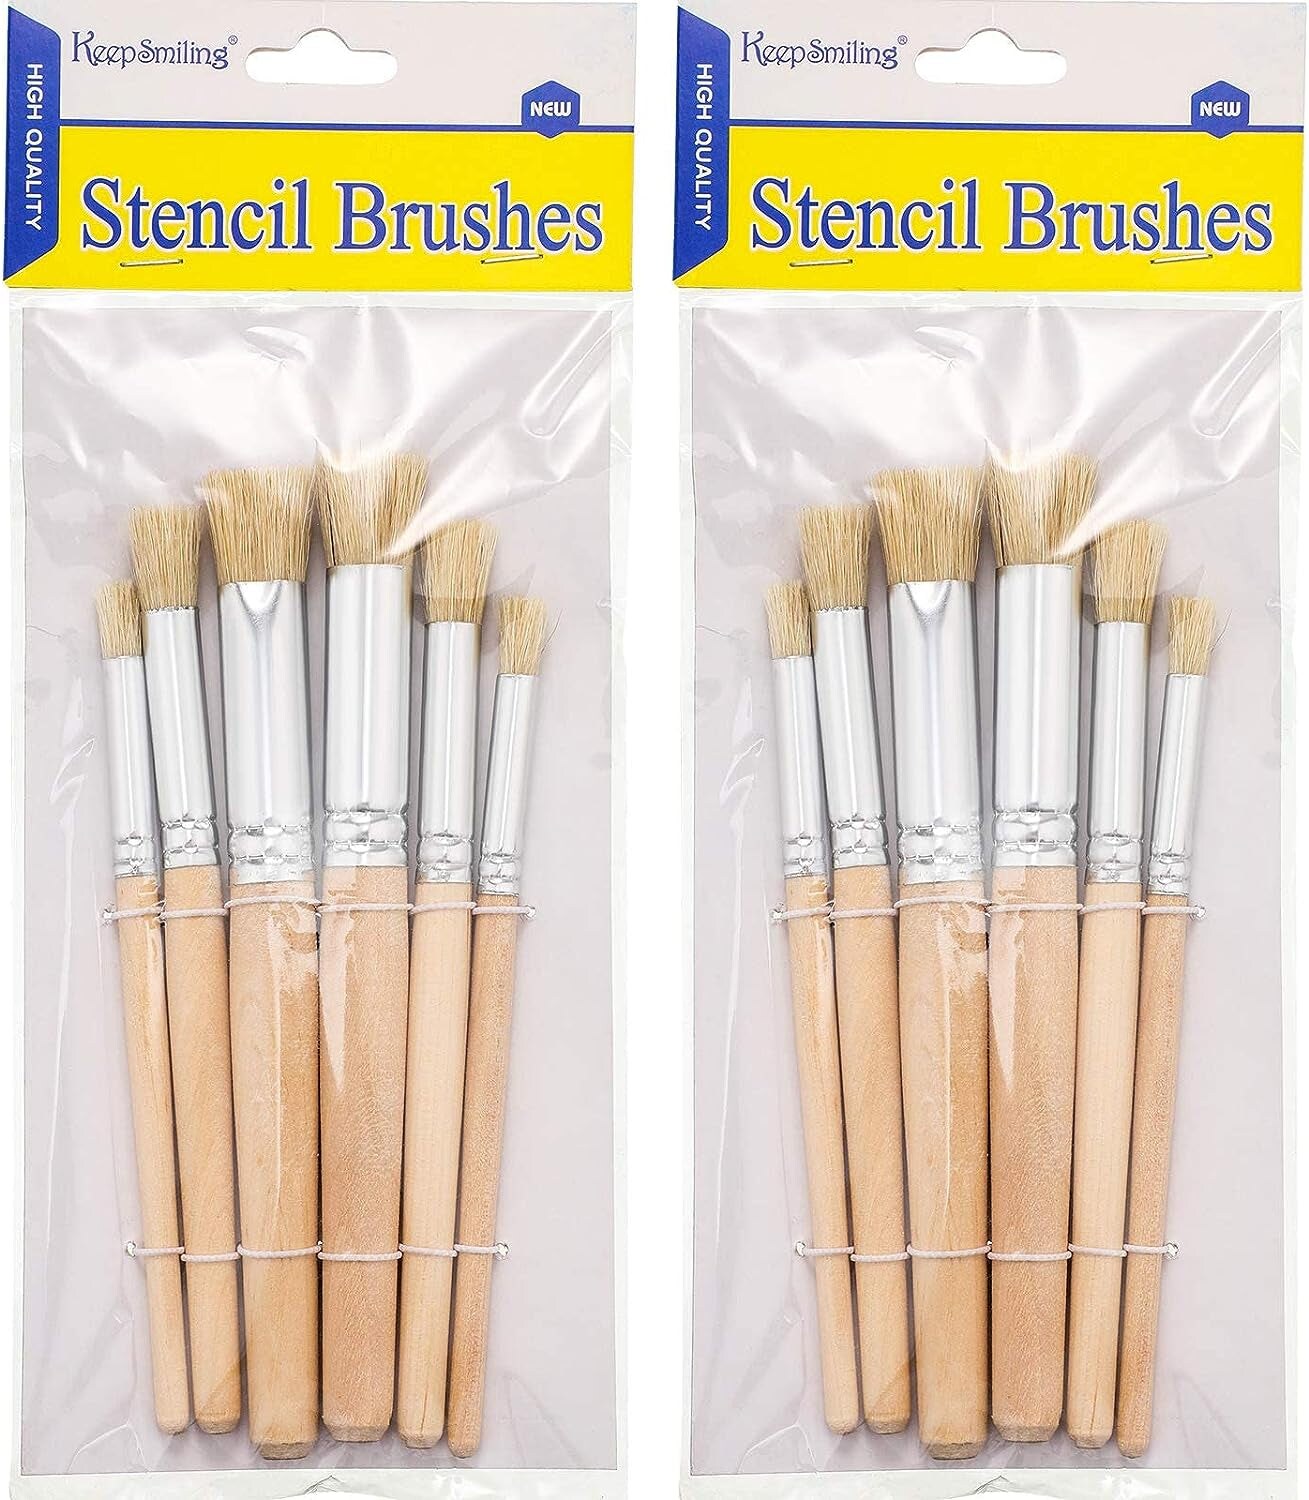 Wooden Stencil Brushes, Natural Bristle Paint Brushes, For Acrylic  Painting, Oil Painting, Watercolor, Card Making, Diy Craft Project (3  Sizes)